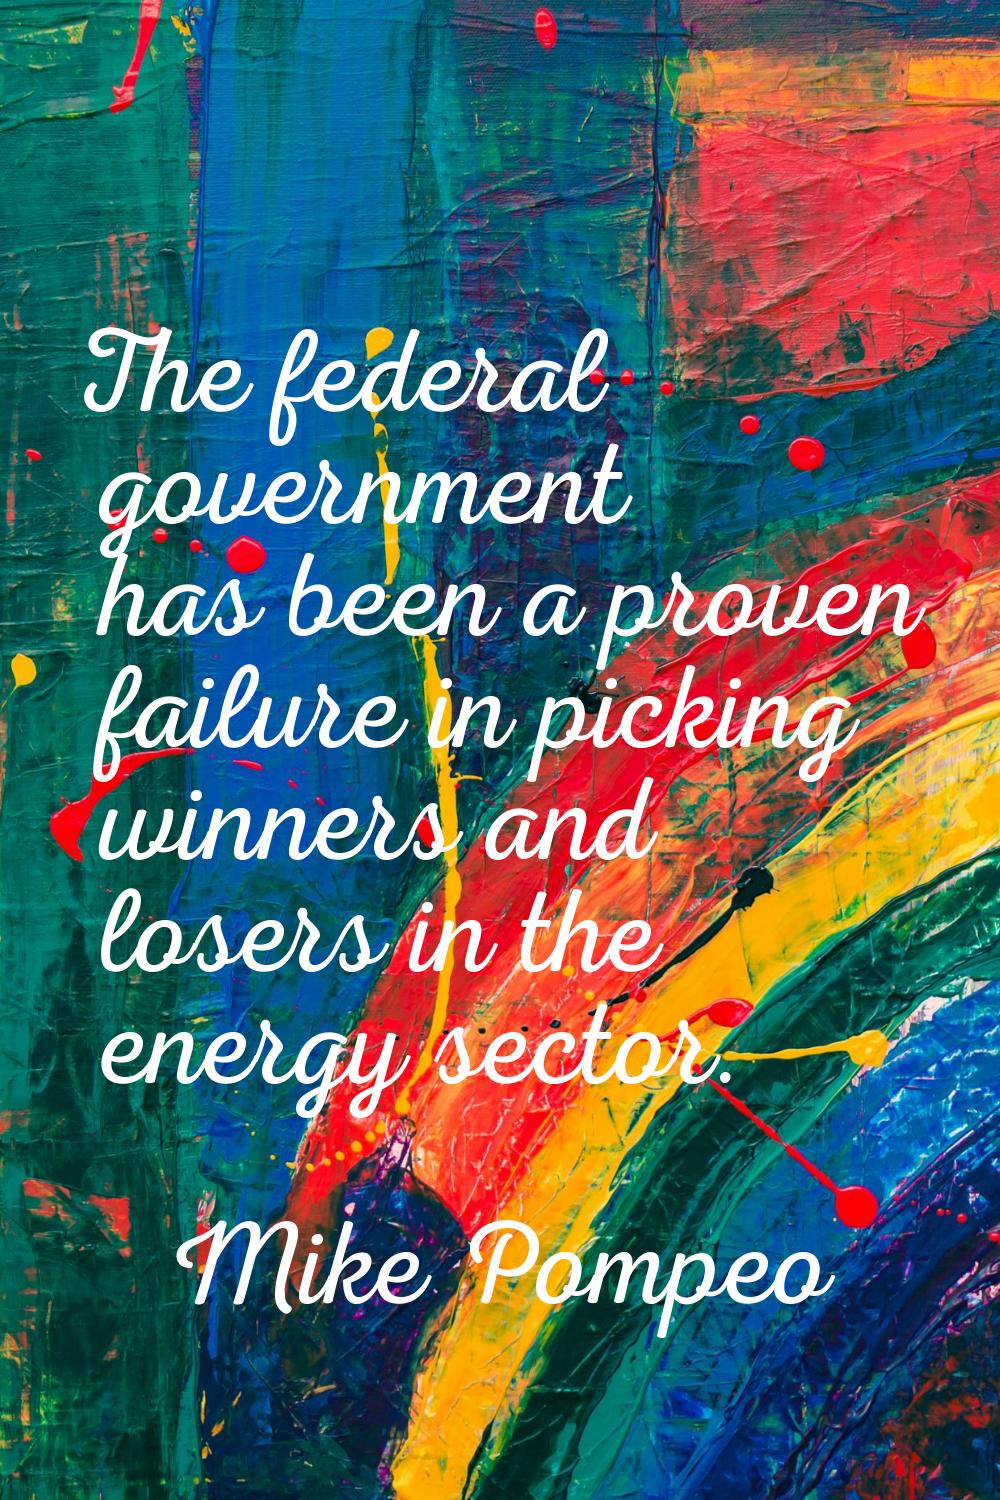 The federal government has been a proven failure in picking winners and losers in the energy sector